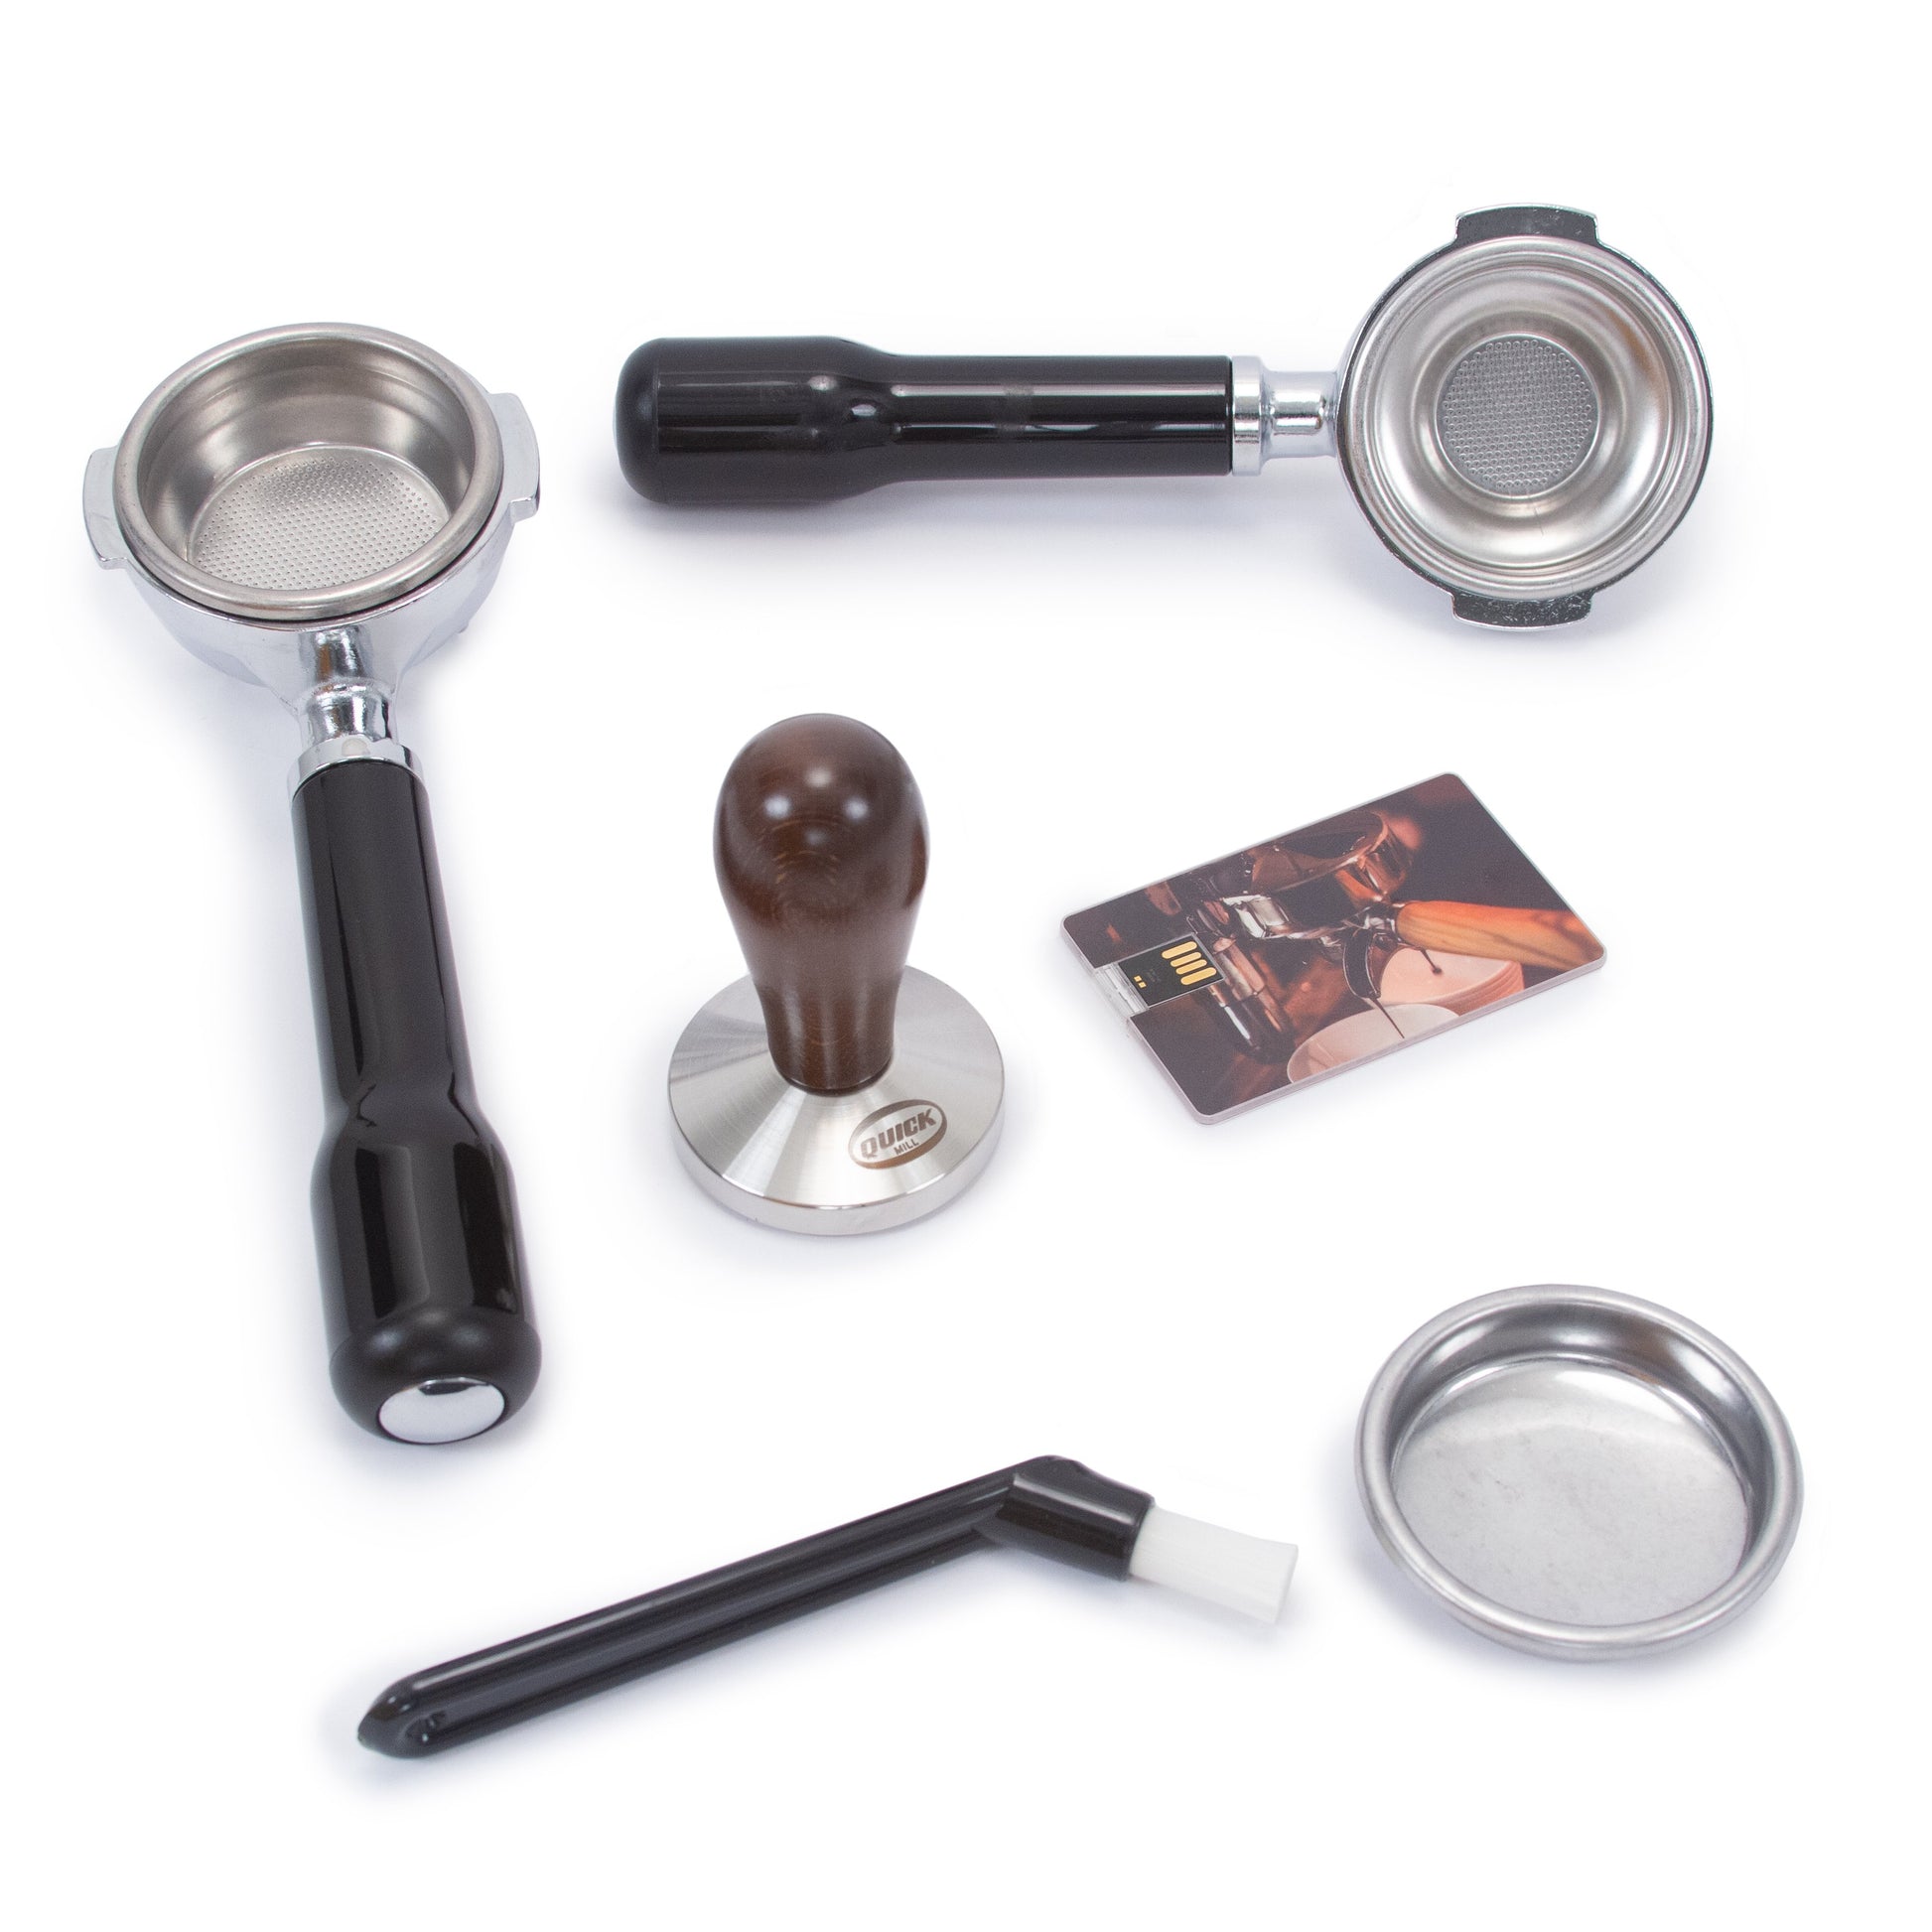 Each Arnos comes with two portafilters and a wood handle tamper.